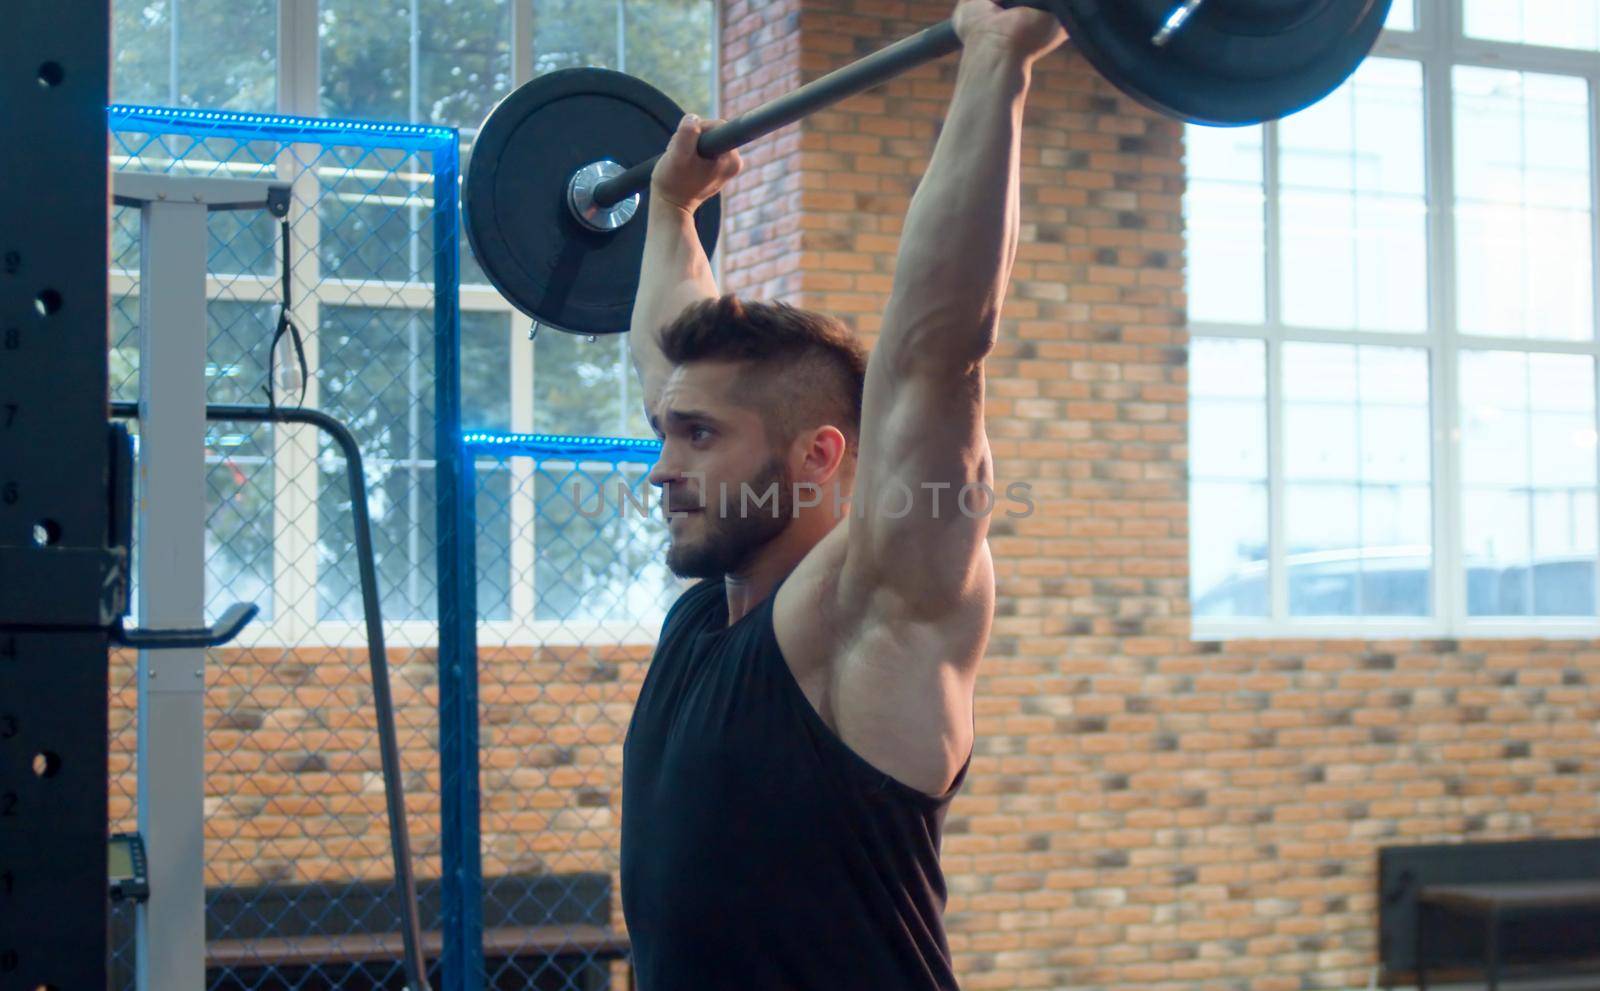 The male athlete lifting barbell. Bodybuilder in the gym